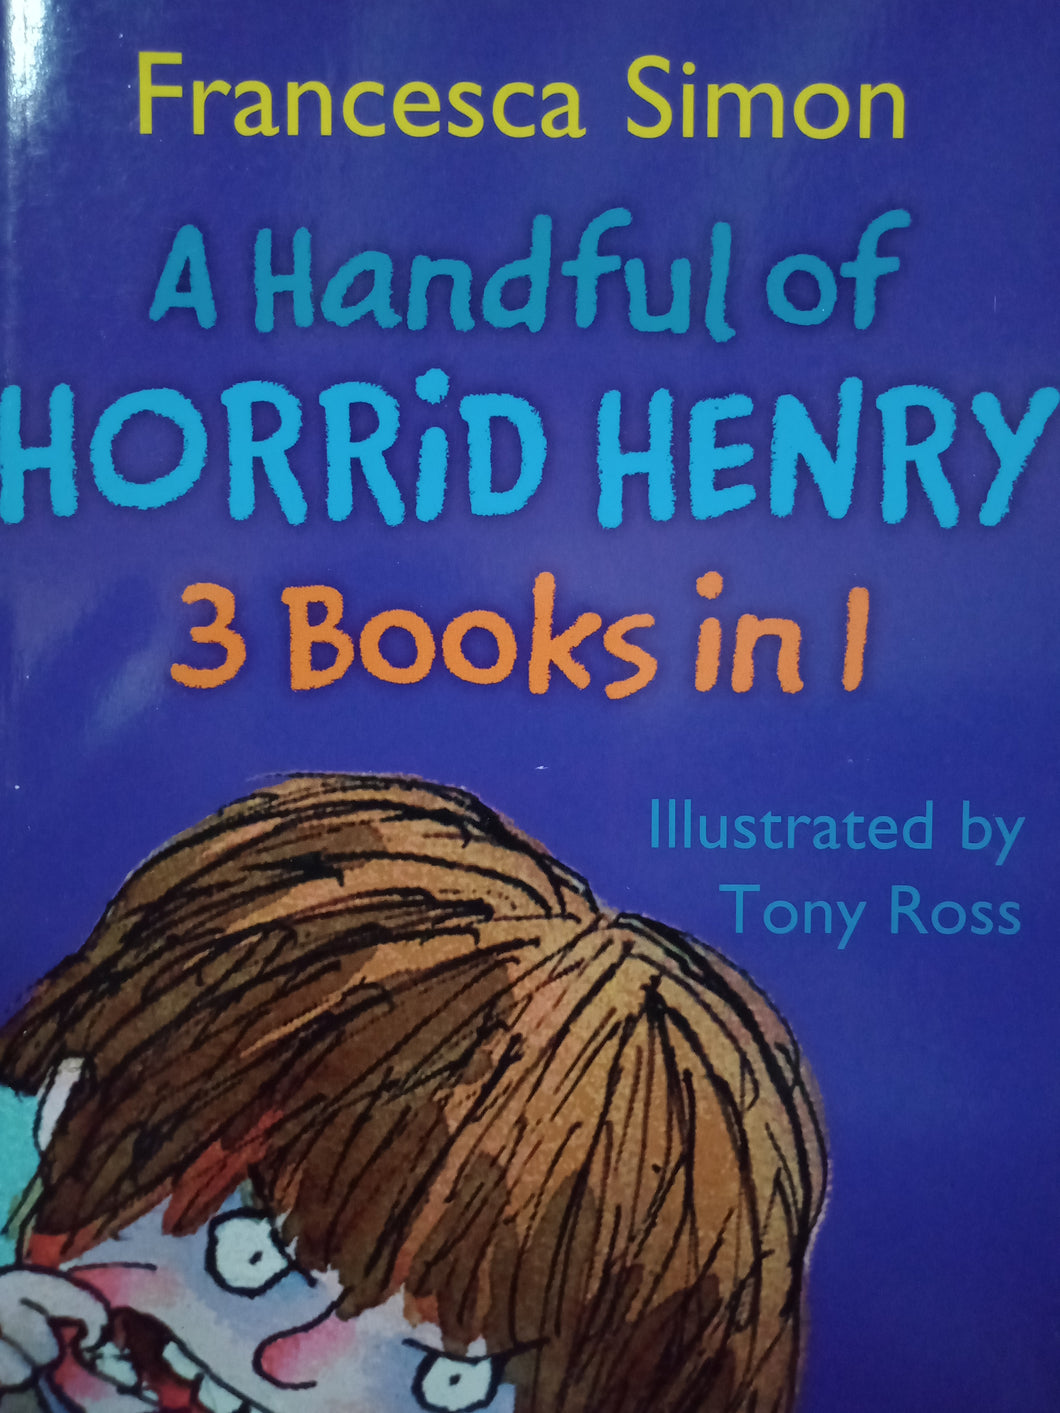 A Handful Of Horrid Henry 3 books in 1 by Francesca Simon WS